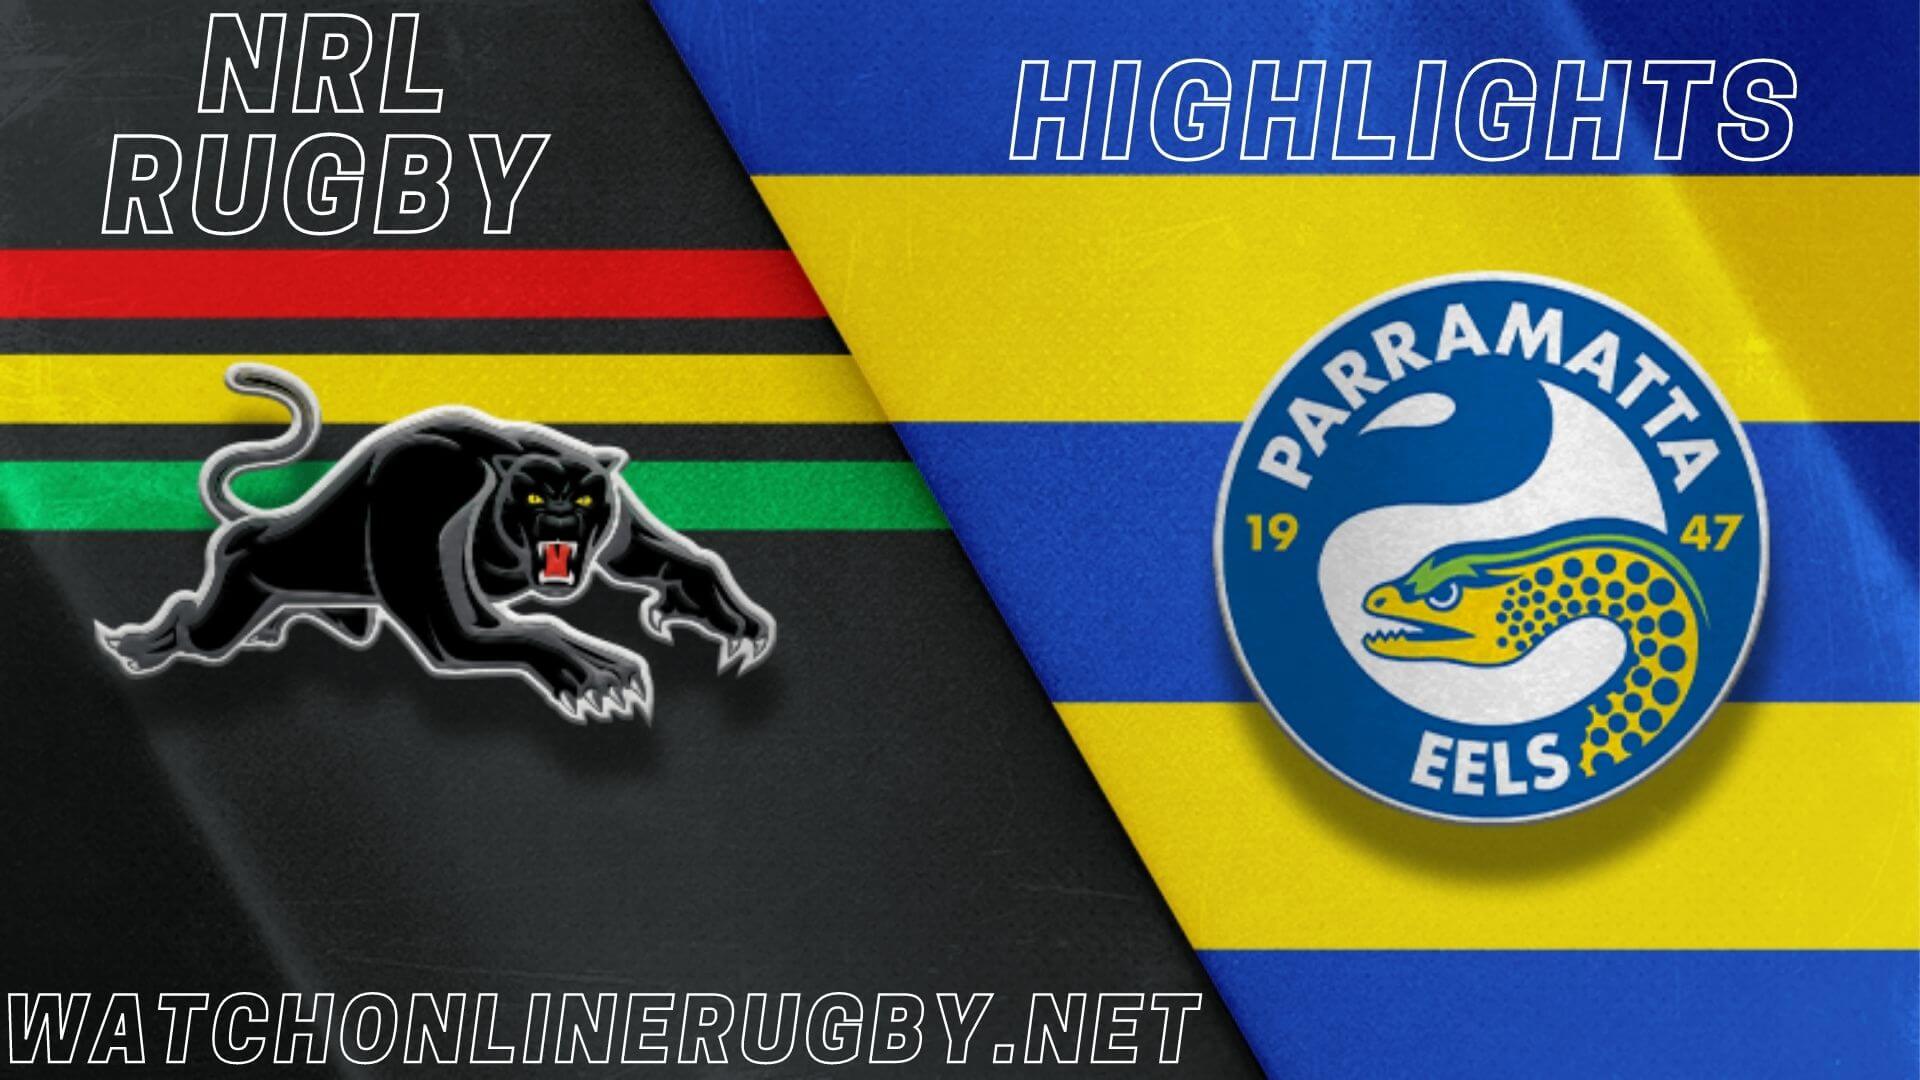 Panthers Vs Eels Highlights Grand Final NRL Rugby